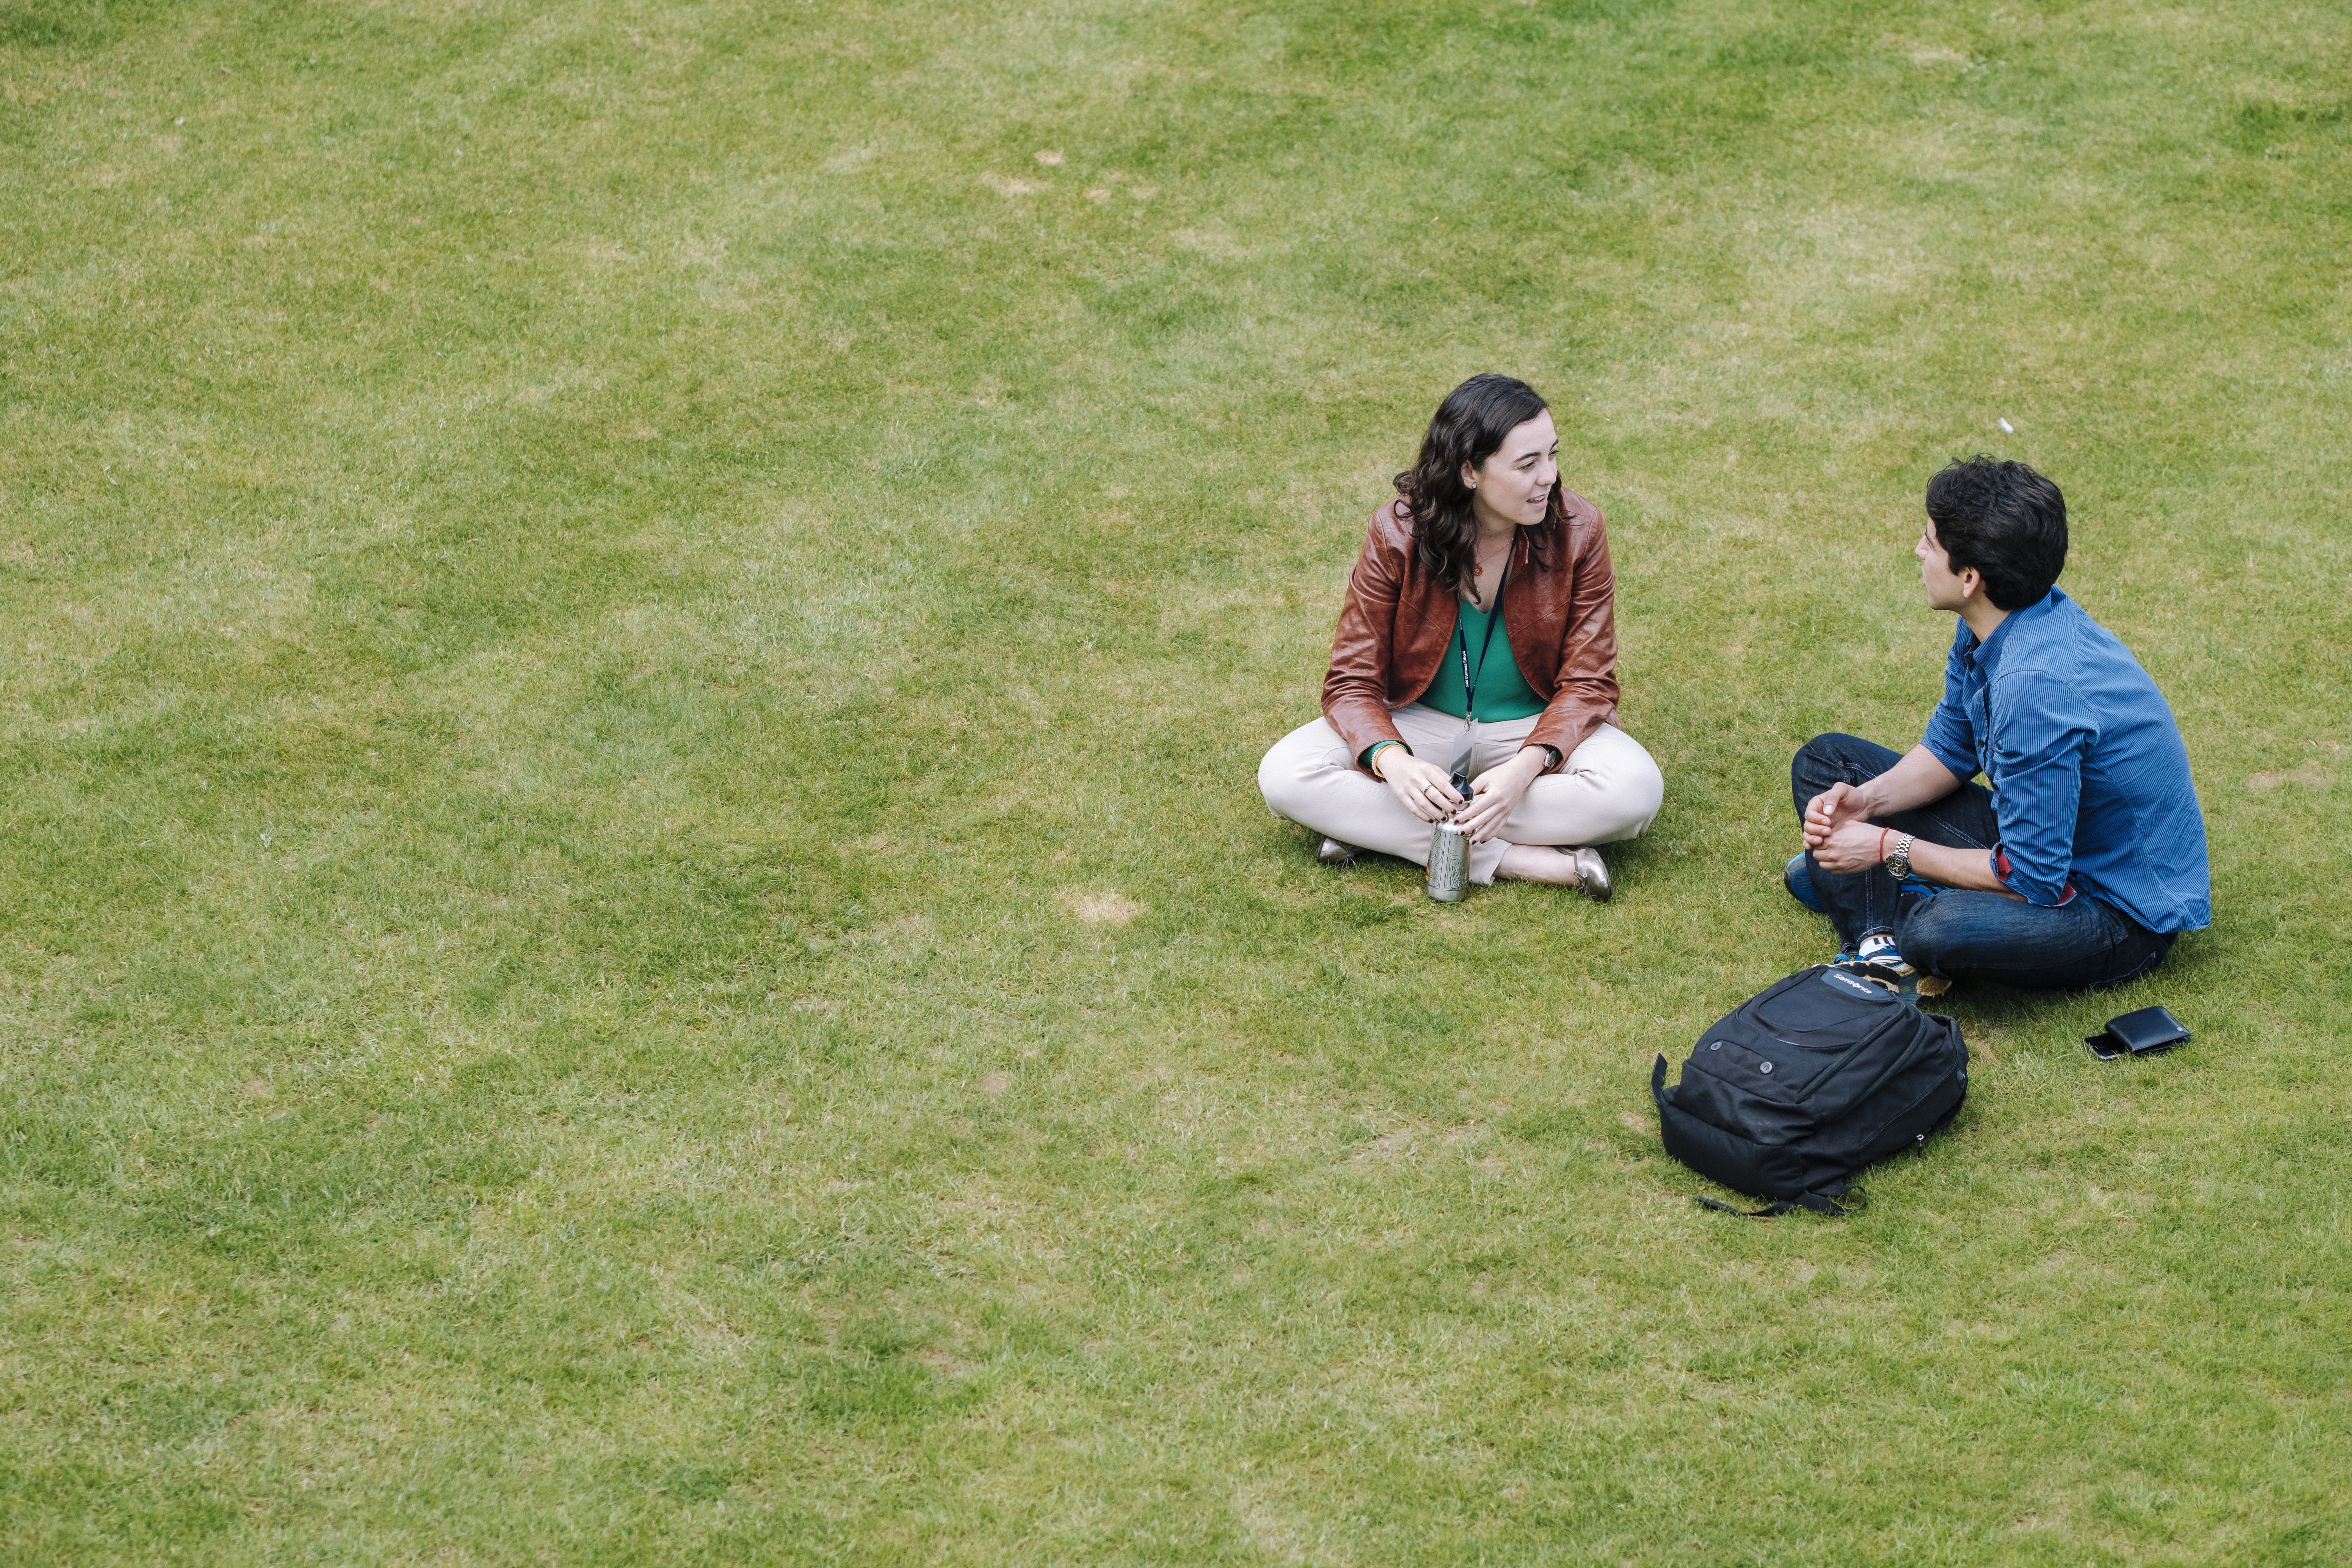 Students relaxing on grass